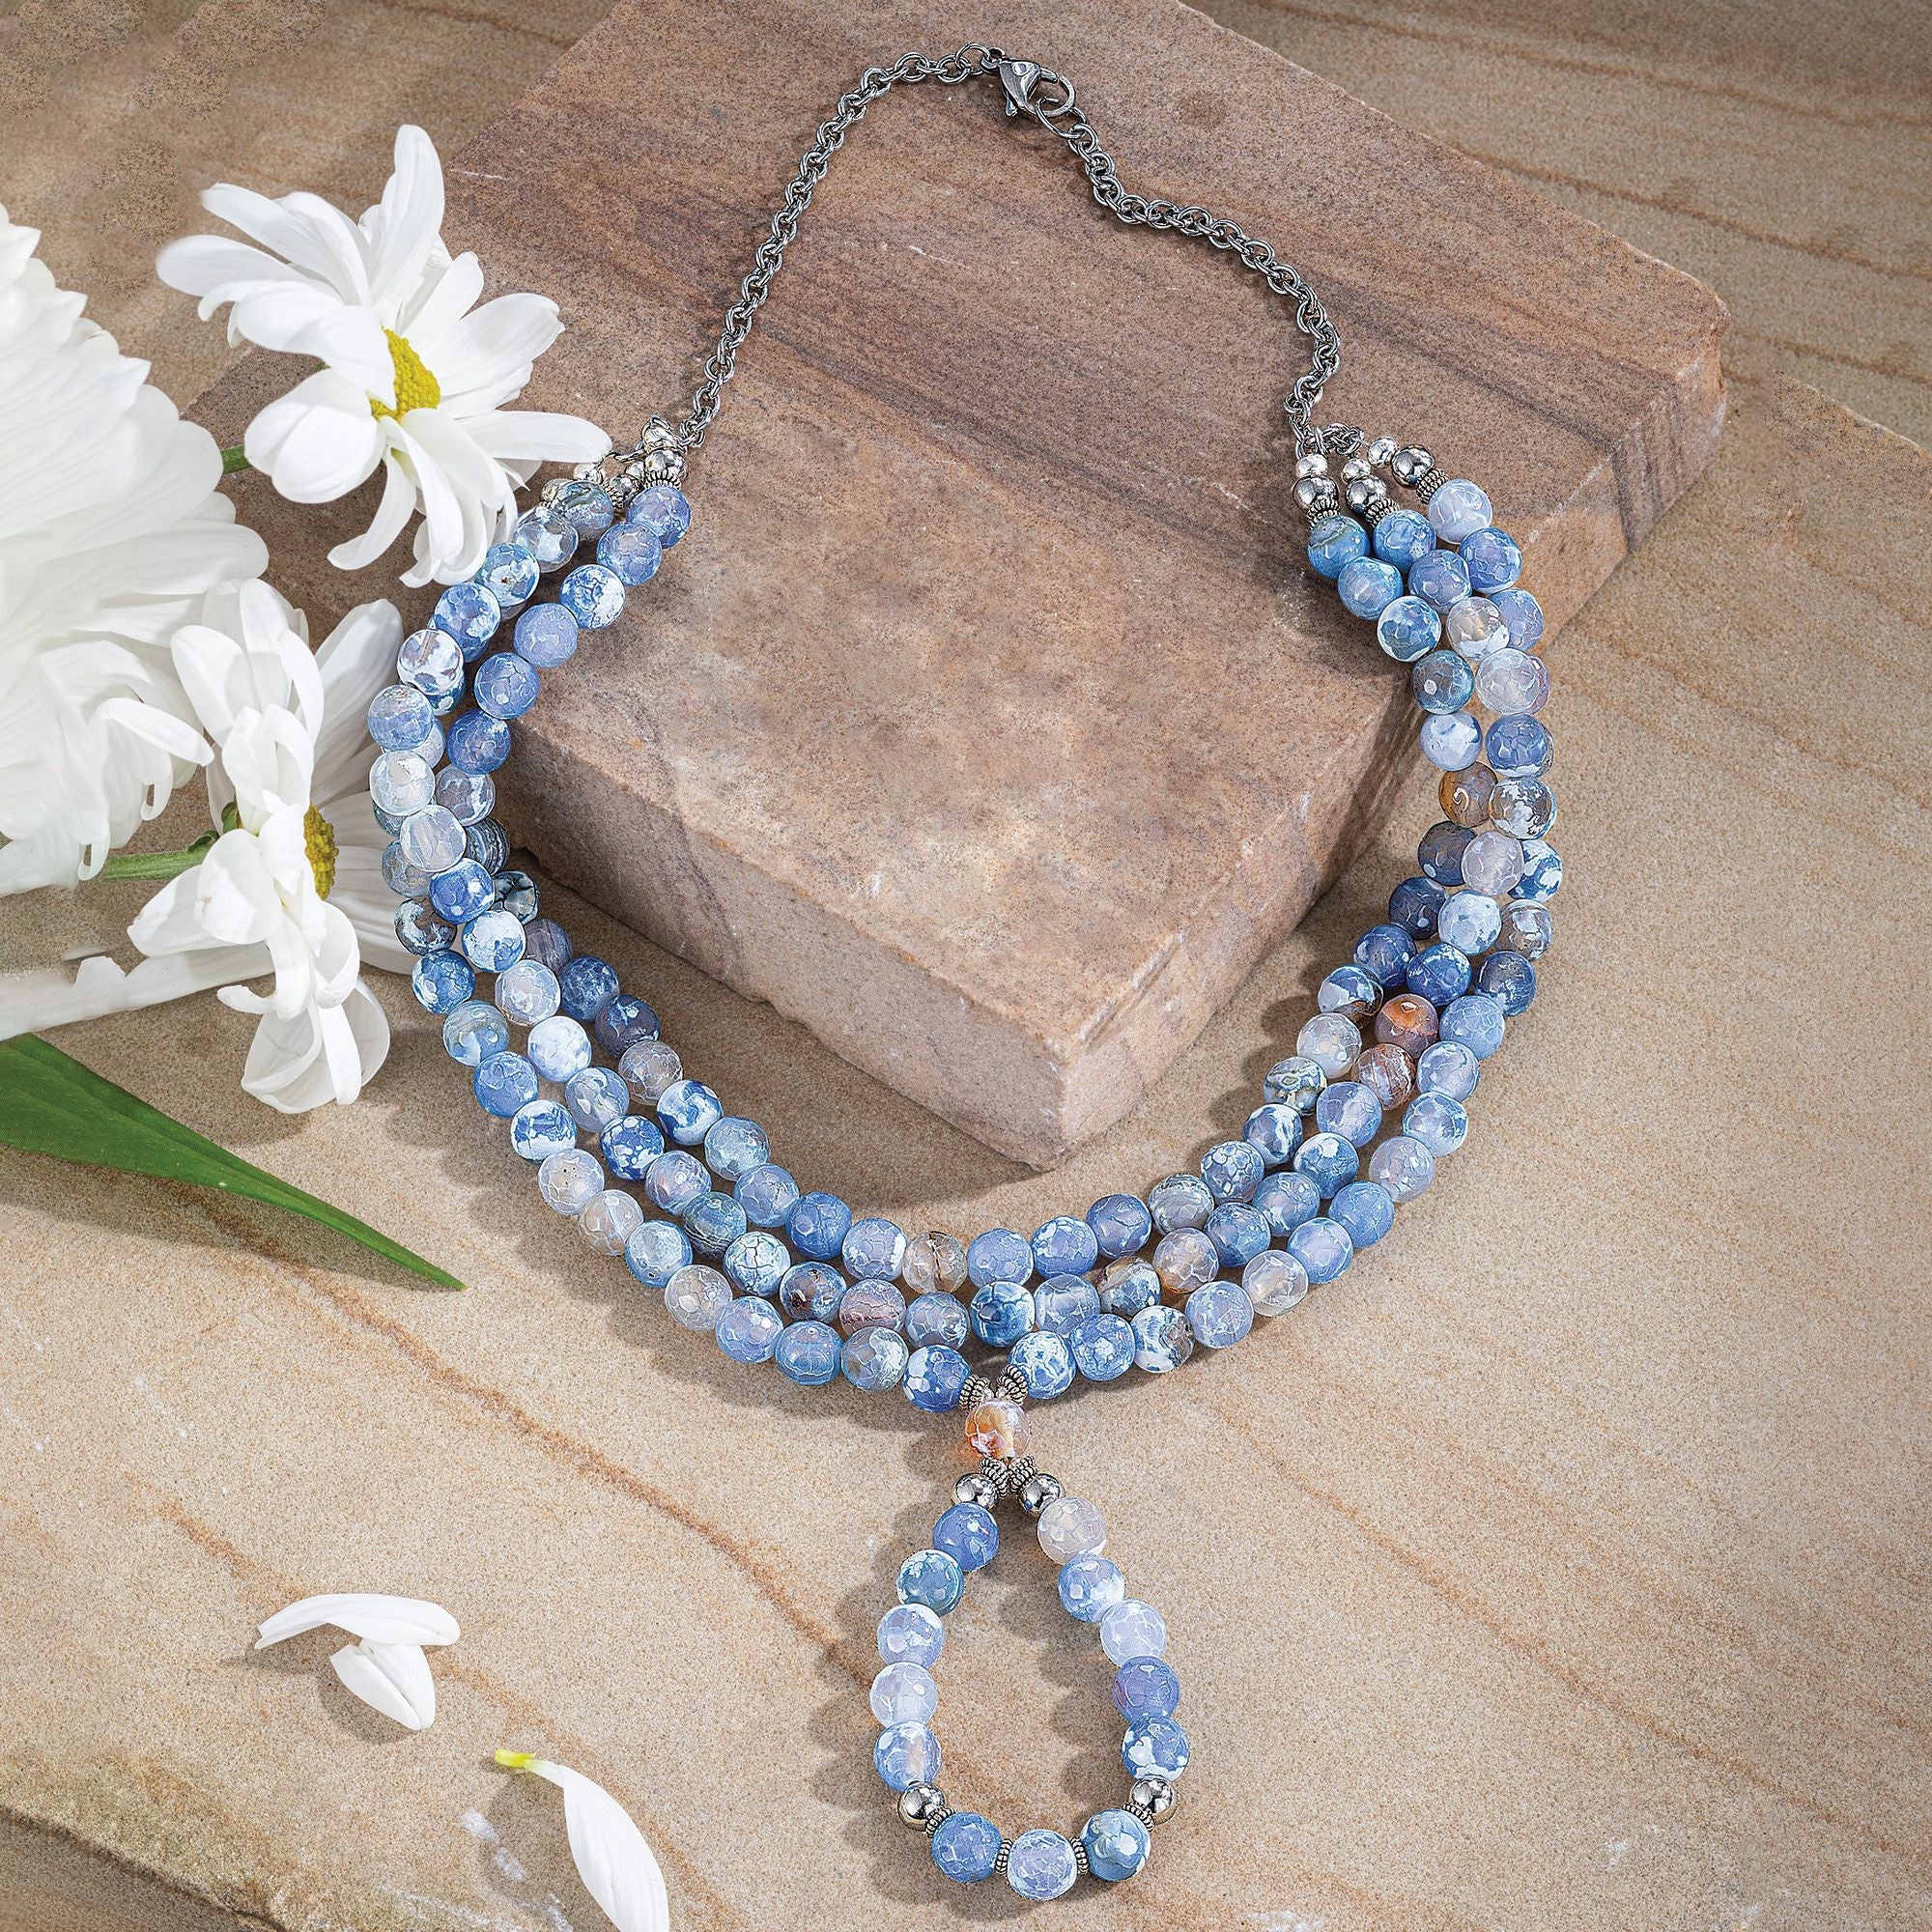 Tranquil Sincerity Agate Necklace